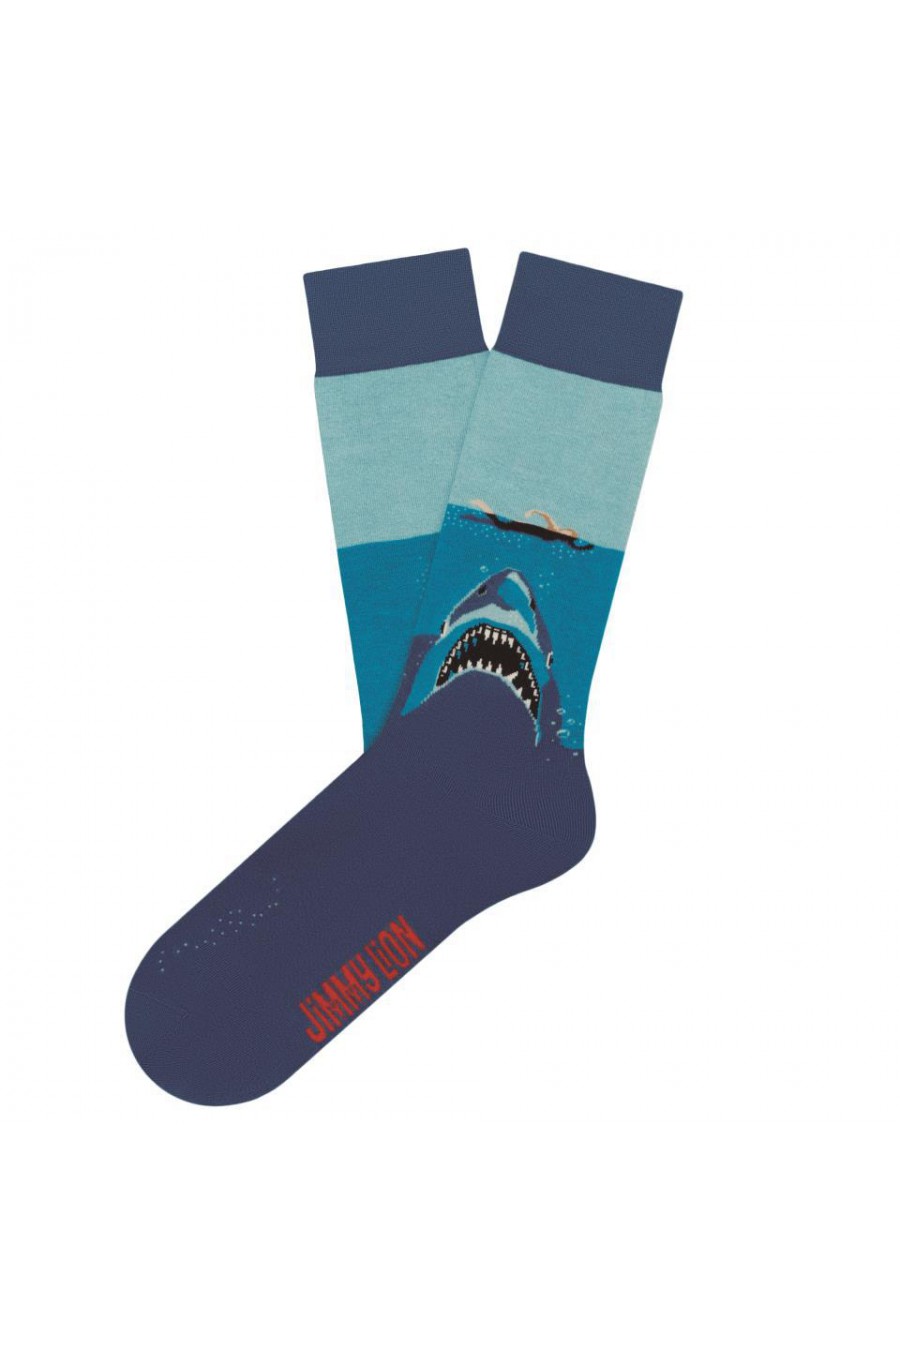 JIMMY LION JAWS SHARK ATTACK BLUE